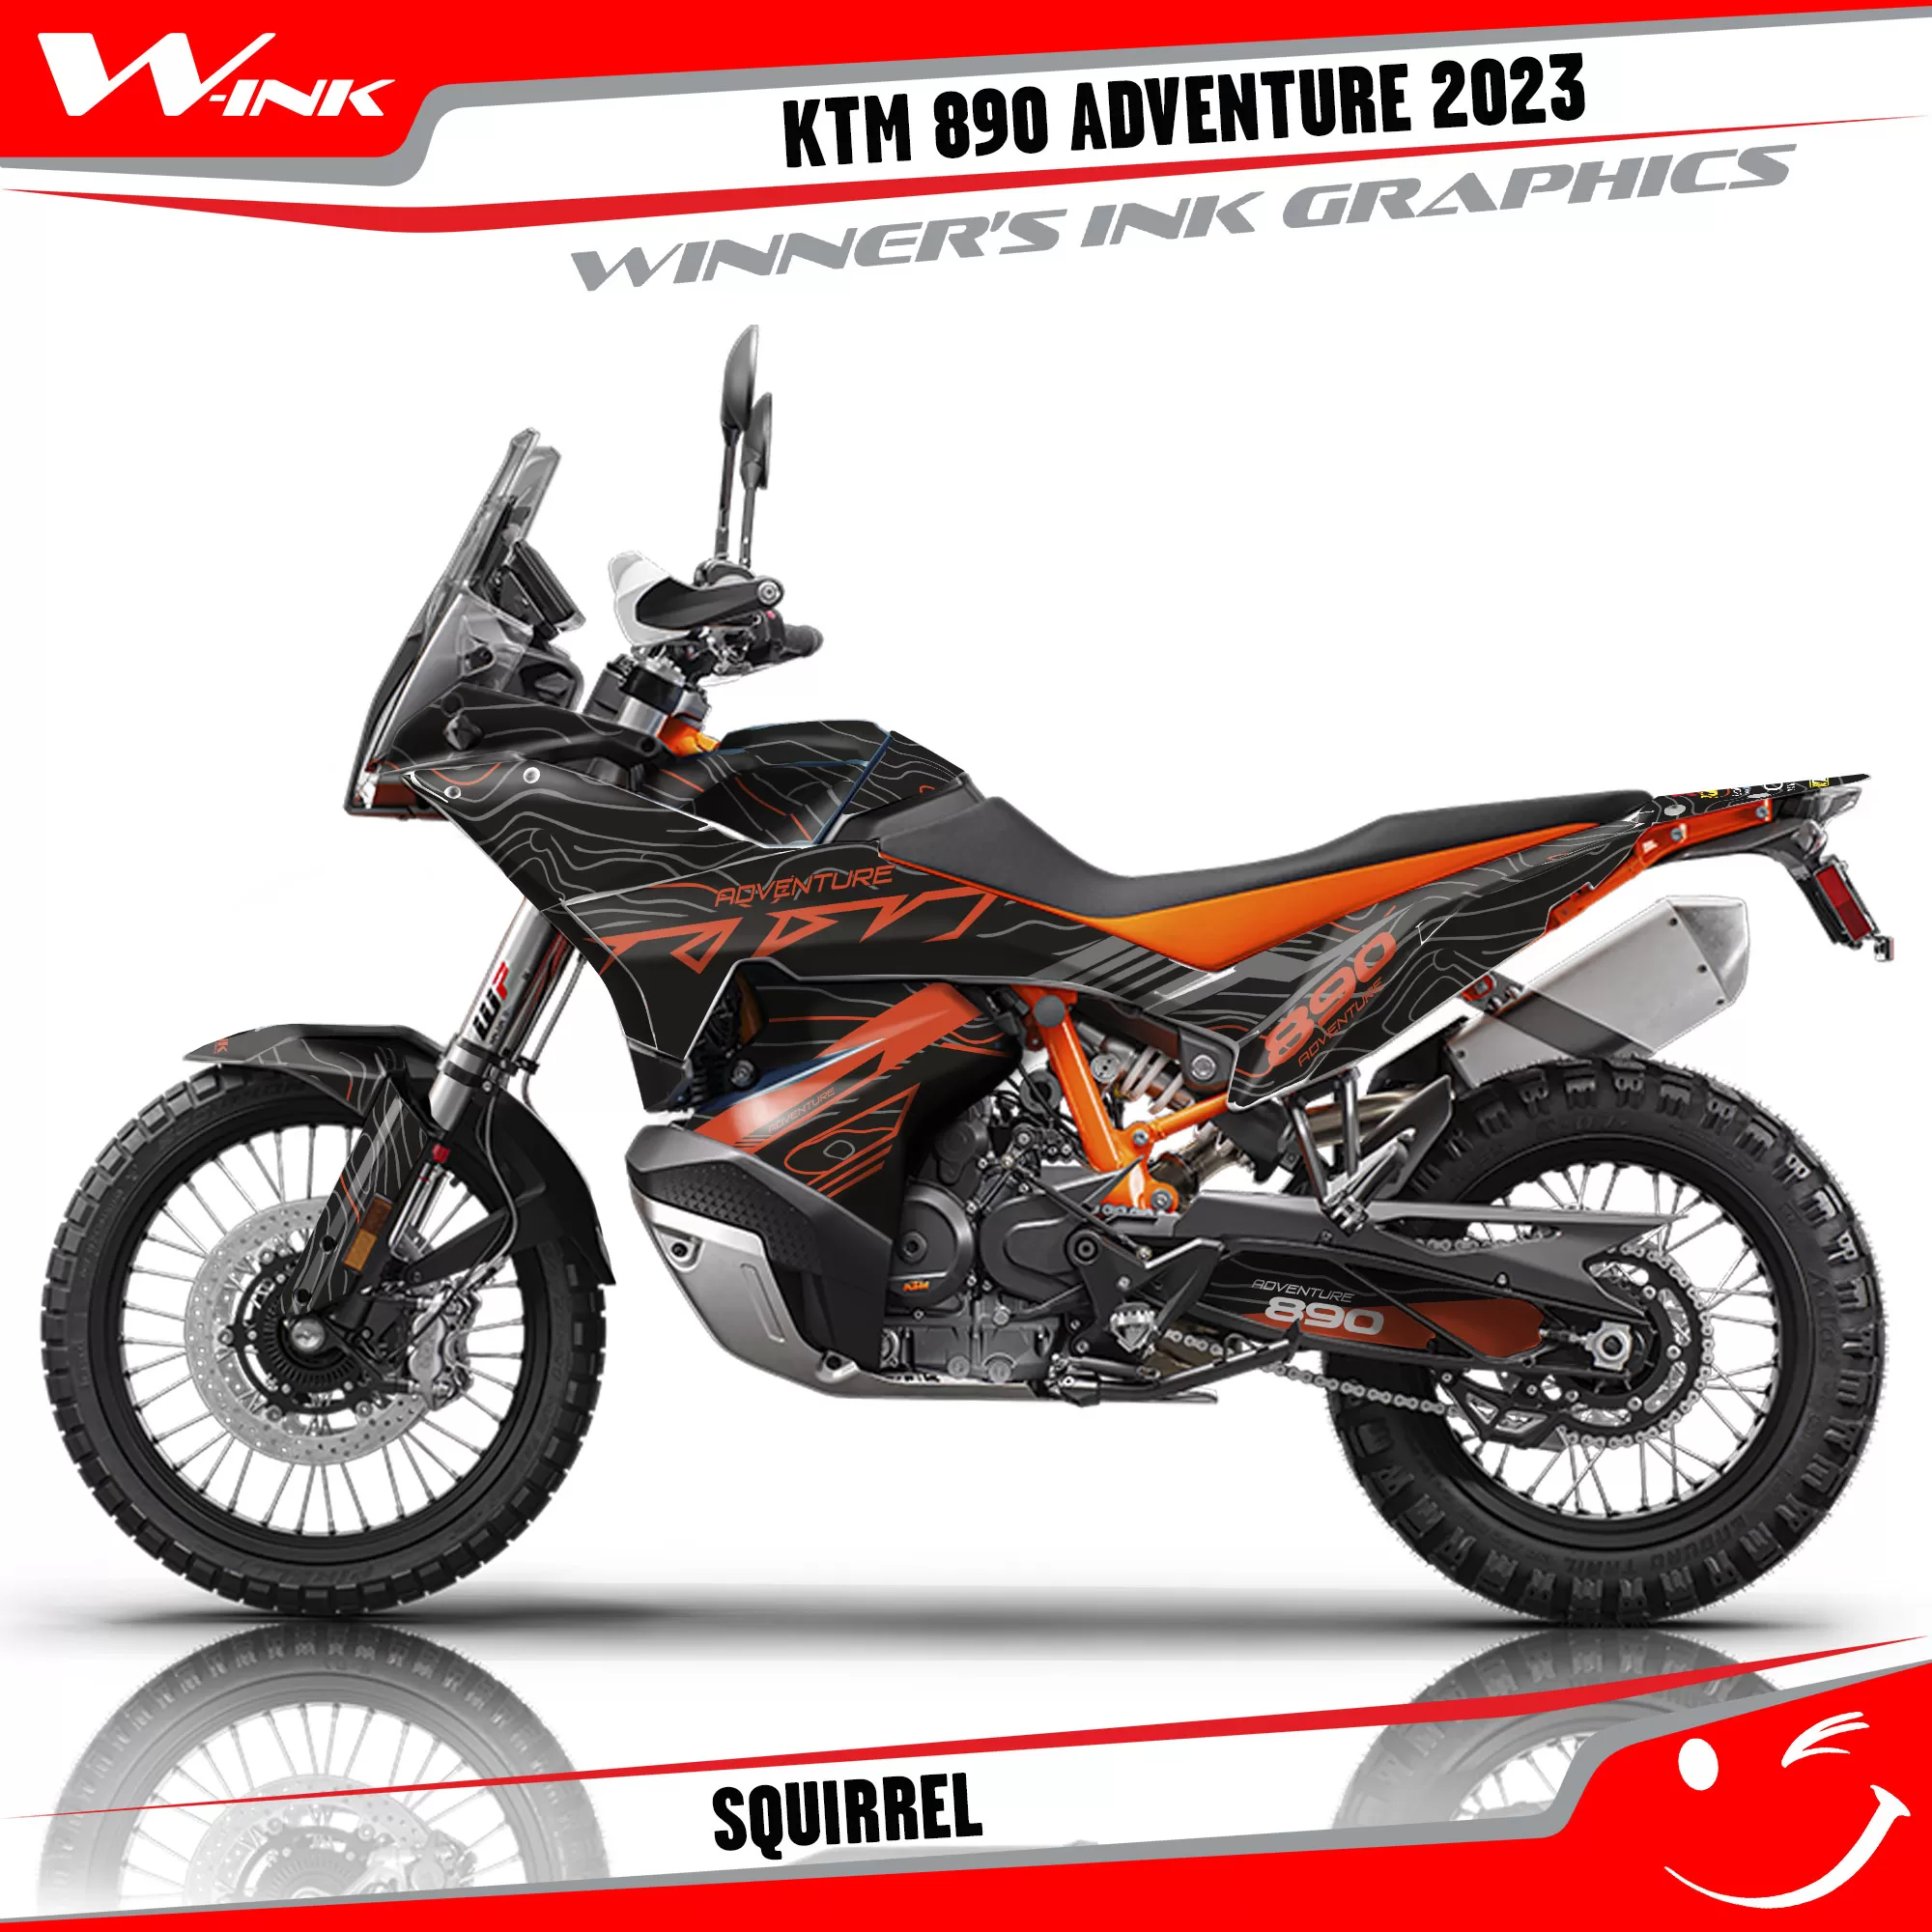 Adventure-890-2023-graphics-kit-and-decals-with-design-Squirrel